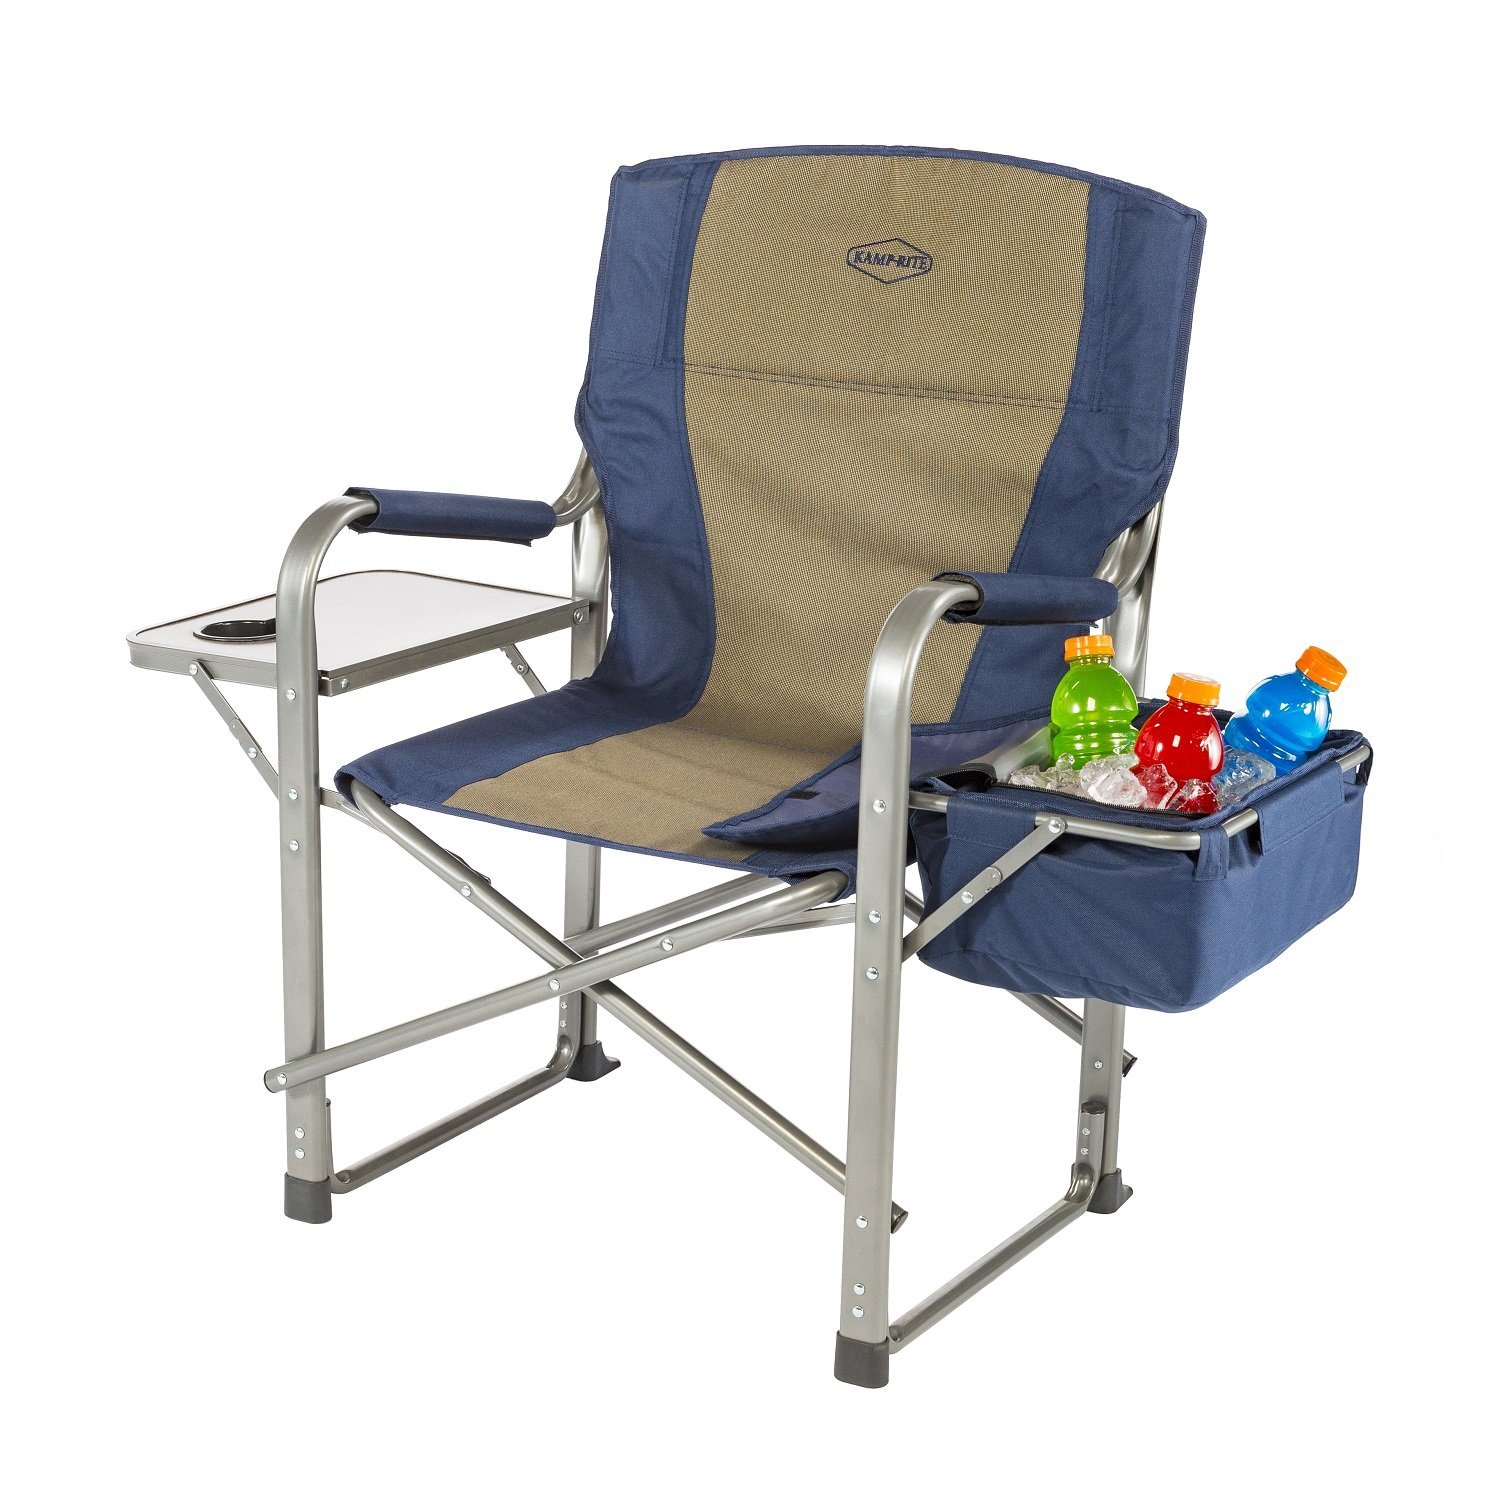 6 Best Camping Chairs to Make Camping Comfy